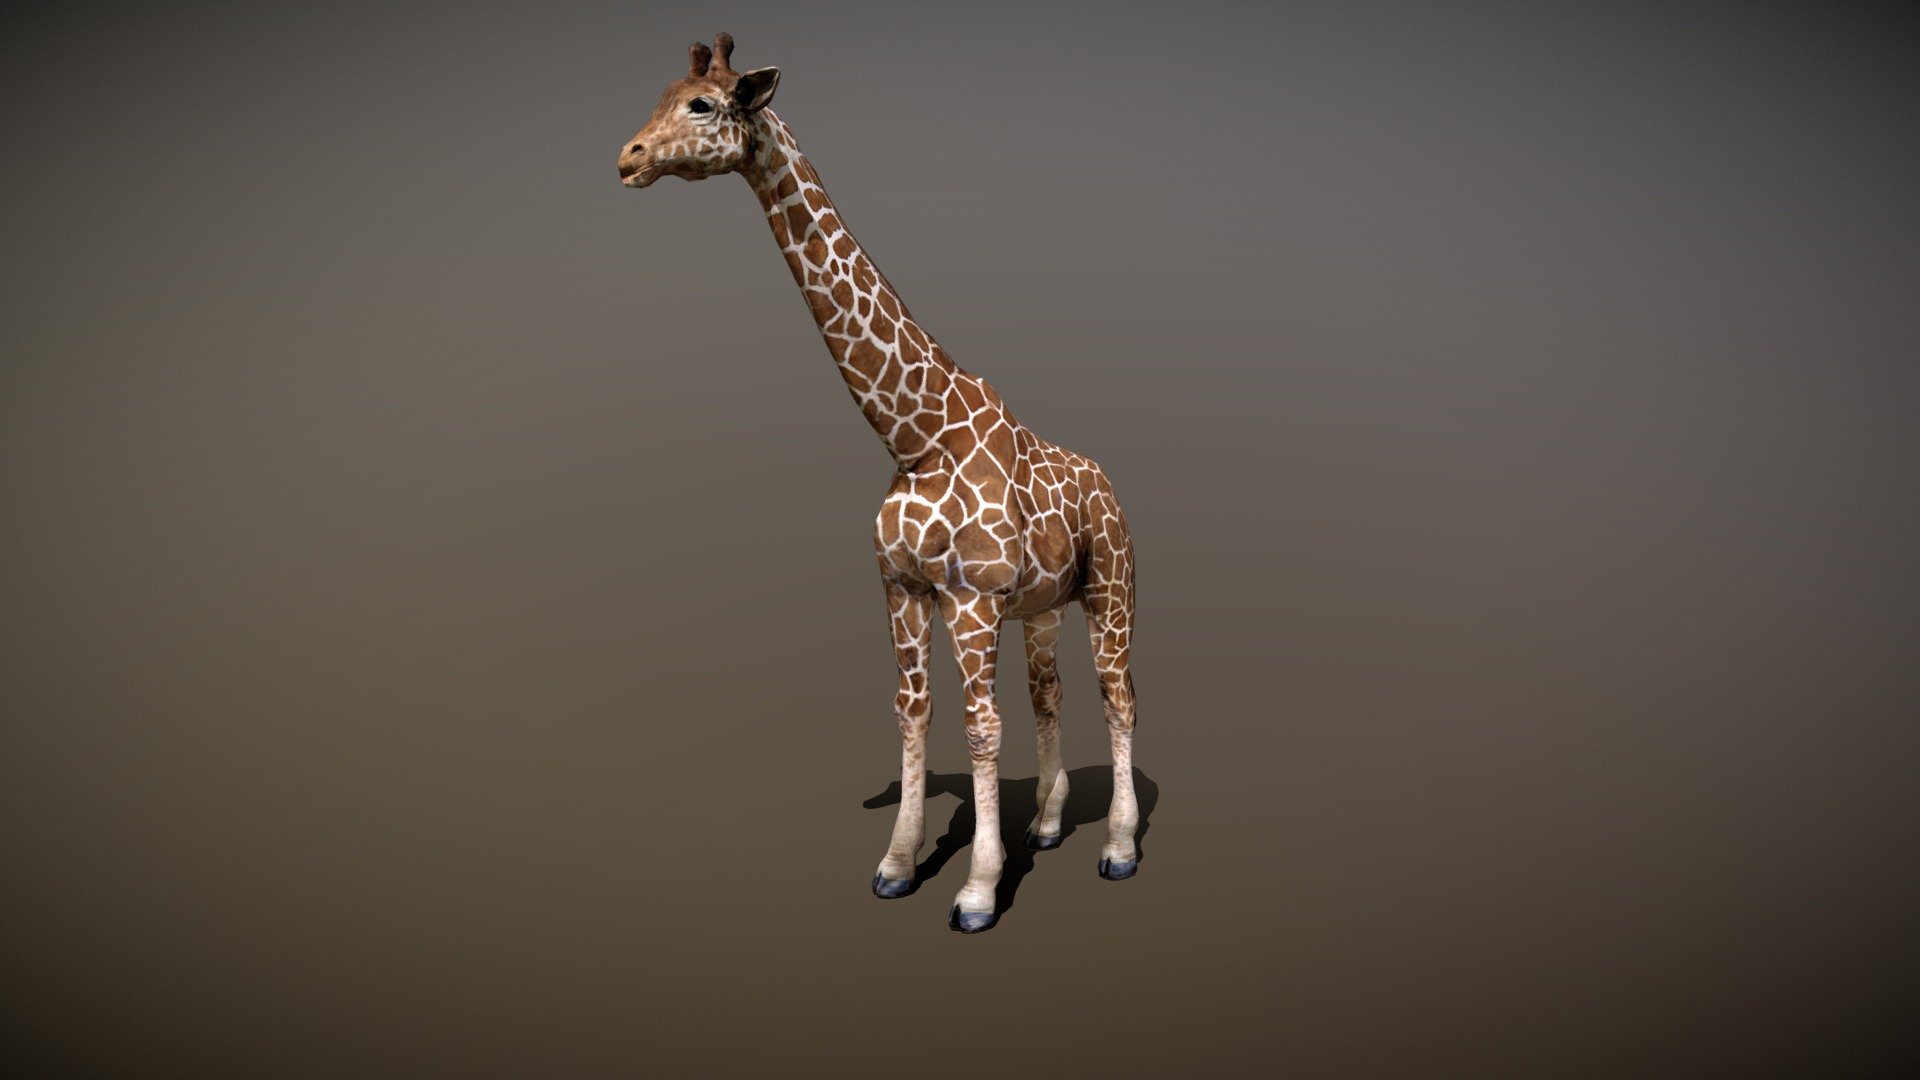 Watch = https://youtu.be/nkl-Q1pTrXM
3D Giraffe Realistic Character fully rigged and motions pack


PACKAGE INCLUDE



High quality model, correctly scaled for an accurate representation of the original object

High Detailed Photorealistic Giraffe, completely UVmapped and smoothable

Many different format like blender, fbx, obj, iclone, dae ETC

Separate Loopable Animations

Height = 15.27 feet

Triangles = 8442

Vertices = 4269

Edges = 12679

Faces = 8442


ANIMATIONS



Idle

Walk

Run

Drink

Eat

Rest


3D PRINTING (OBJ | STL)



Idle

Stand

Walk 1

Walk 2

Walk 3

Run 1

Run 2

Open Mouth

Eat

Drink


NOTE



GIVE CREDIT BILAL CREATION PRODUCTION

SUBSCRIBE YOUTUBE CHANNEL = https://www.youtube.com/BilalCreation/playlists

FOLLOW OUR STORE = https://sketchfab.com/bilalcreation/models

LIKE AND GIVE FEEDBACK ON THE MODEL


CONTACT =  https://sites.google.com/view/bilalcreation/contact-us

ORDER      =  https://sites.google.com/view/bilalcreation/order - Giraffe with Animation - Buy Royalty Free 3D model by Bilal Creation Production (@bilalcreation) 3d model